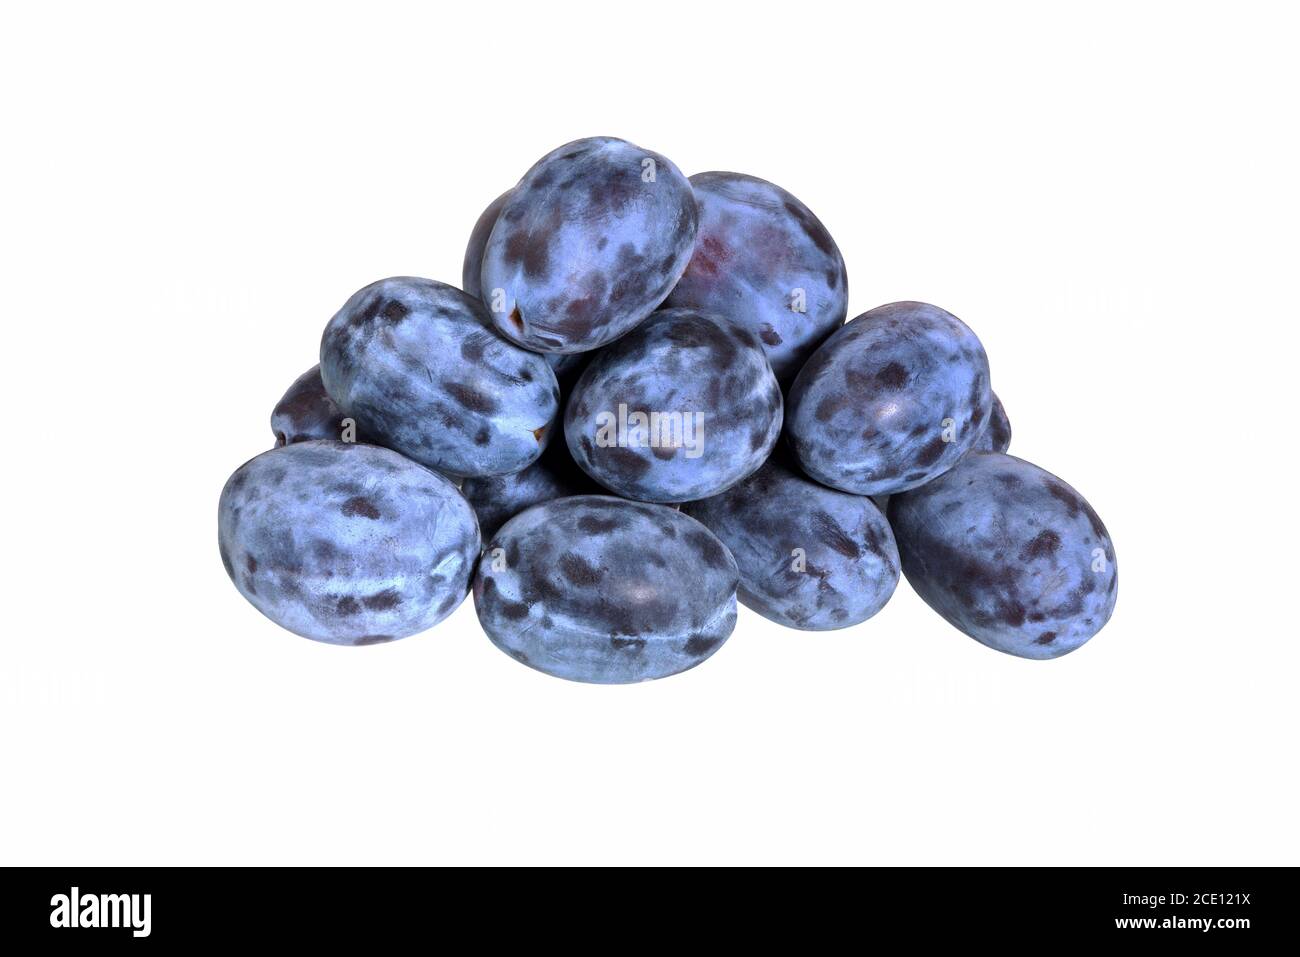 Plums isolated on White Background. Juicy prunes plum heap close up. Stock Photo